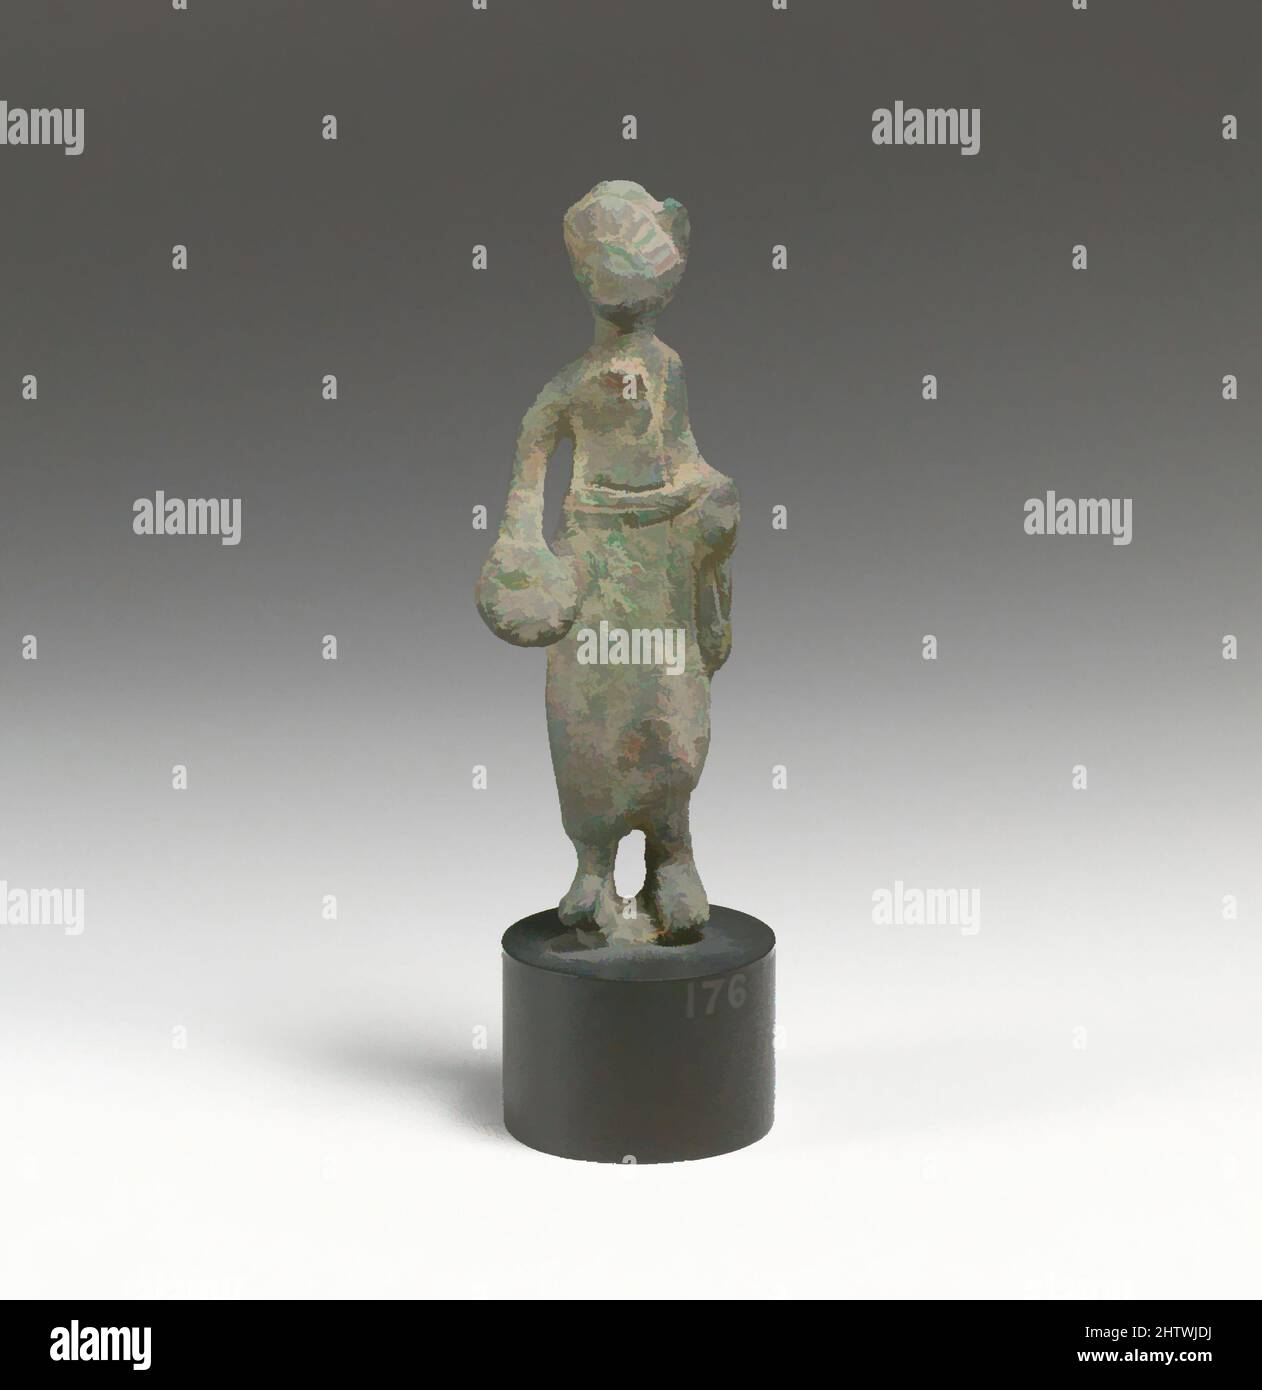 Art inspired by Statuette of a man with vessel, Bronze, H.: 3 7/16 in. (8.7 cm), Bronzes, Classic works modernized by Artotop with a splash of modernity. Shapes, color and value, eye-catching visual impact on art. Emotions through freedom of artworks in a contemporary way. A timeless message pursuing a wildly creative new direction. Artists turning to the digital medium and creating the Artotop NFT Stock Photo